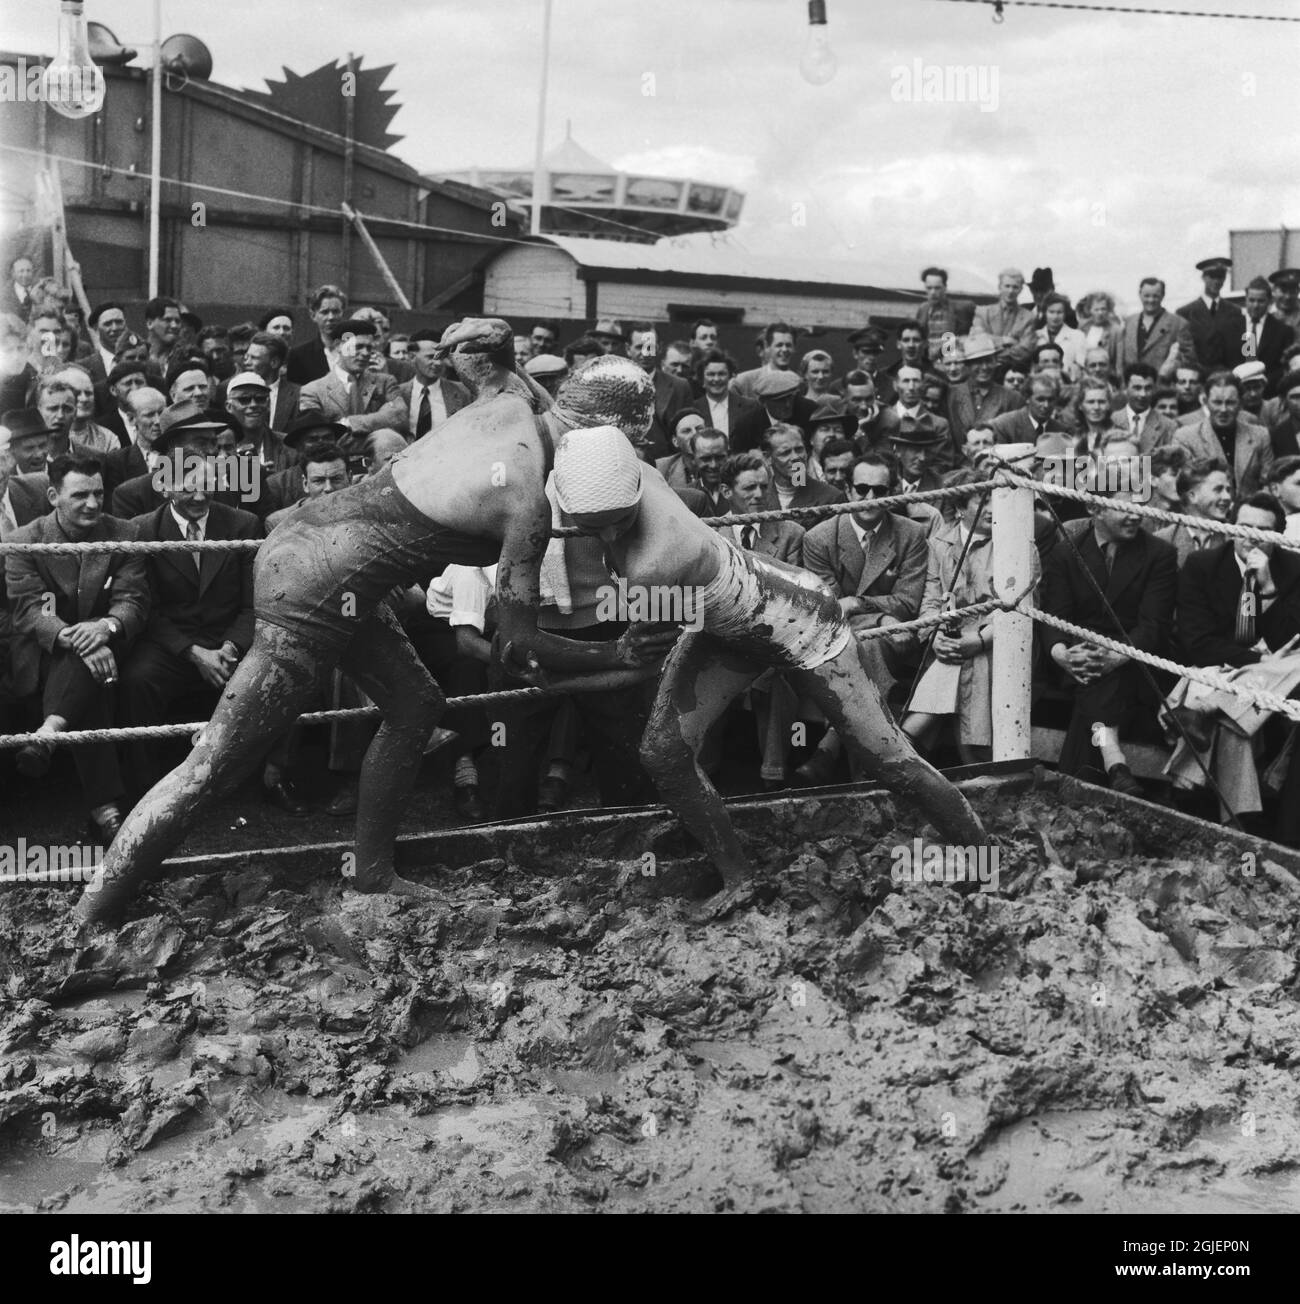 Mud wrestling ladies draw a large crowd at the annual market in Kivik, Sweden. Stock Photo